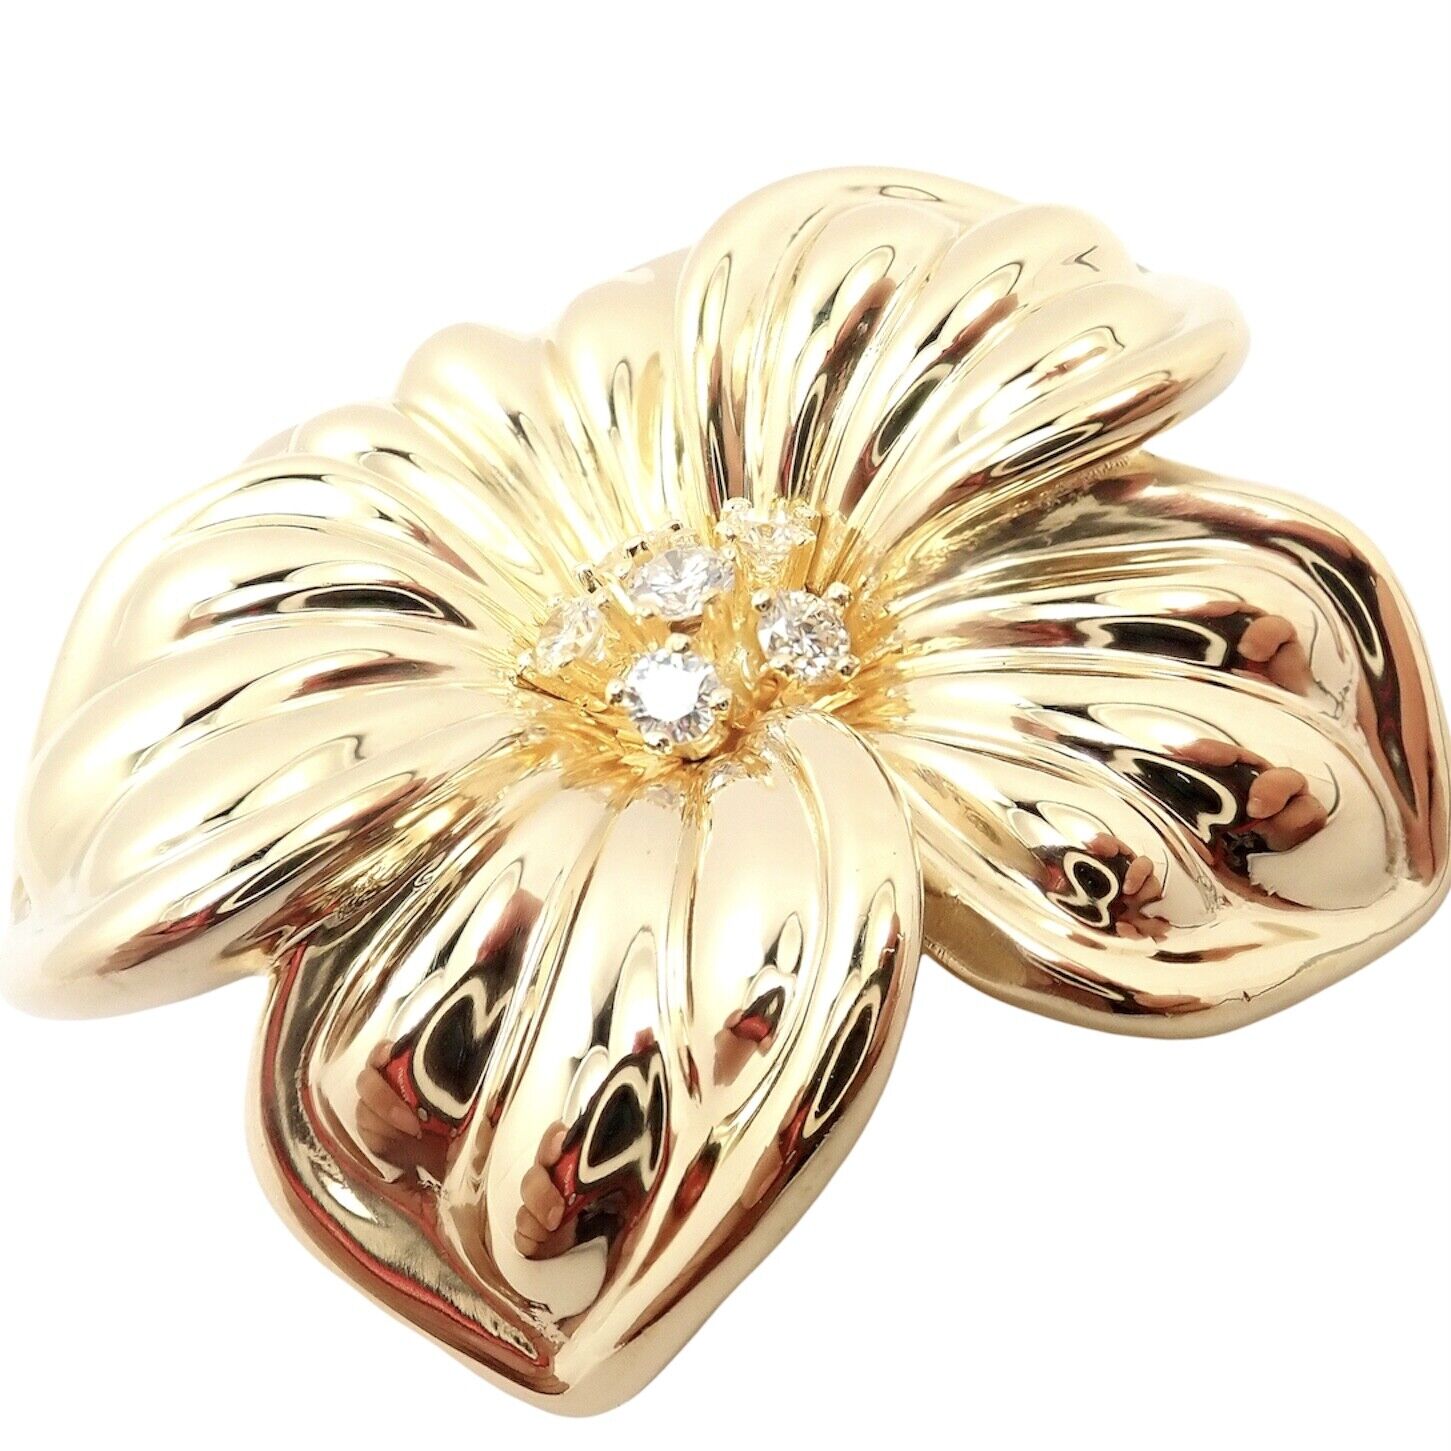 Van Cleef & Arpels Jewelry & Watches:Fine Jewelry:Brooches & Pins Authentic Van Cleef & Arpels Diamond 18k Yellow Gold Large Magnolia Pin Brooch